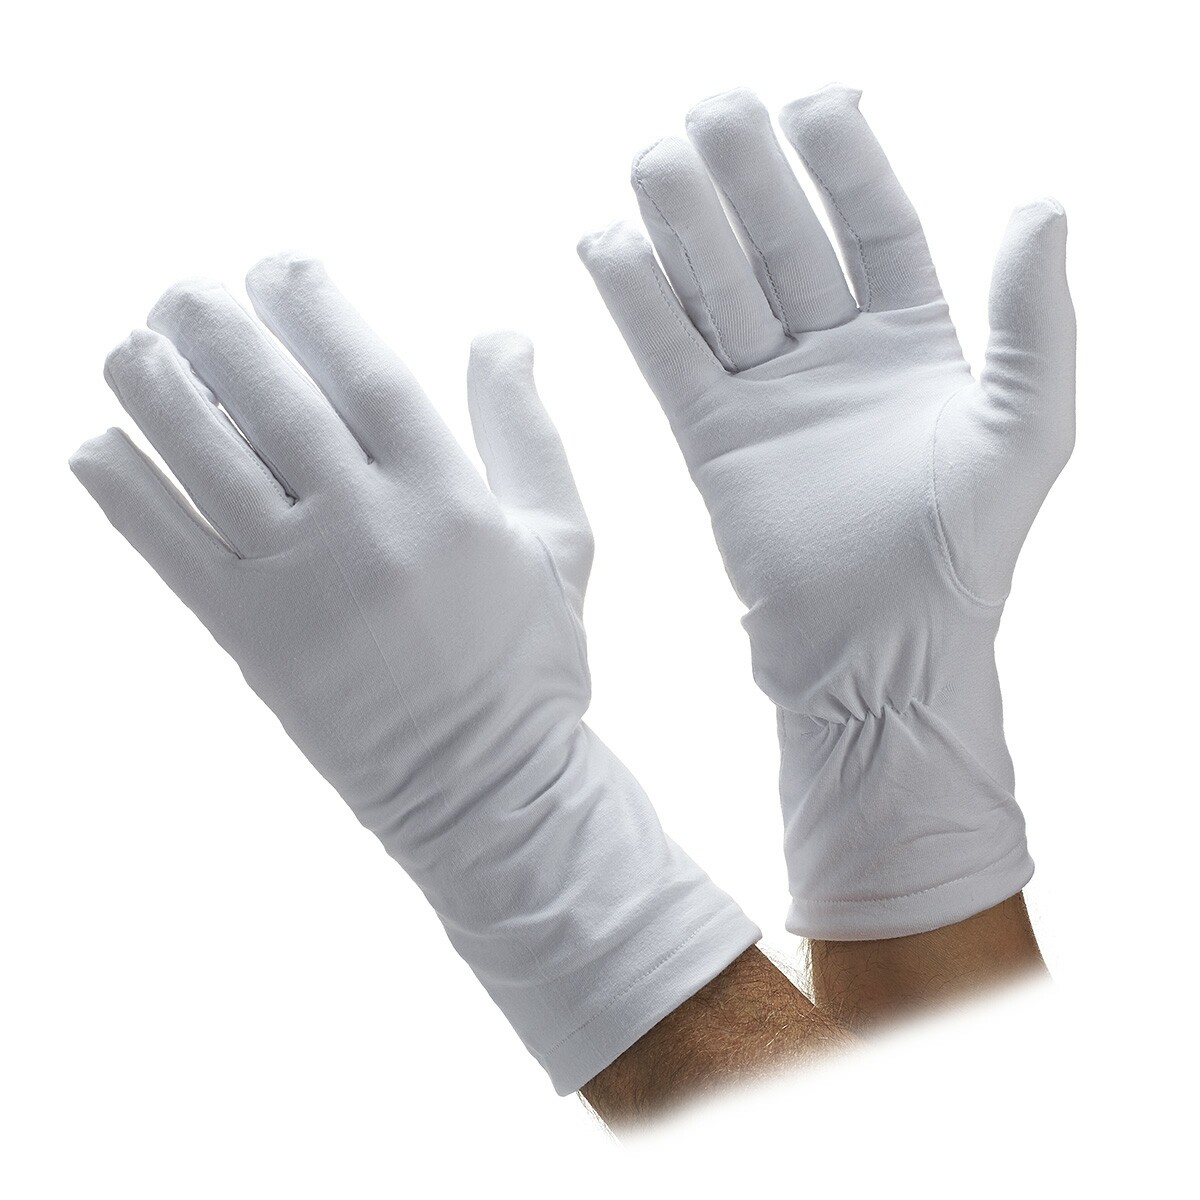 Coin Jewelry Silver Inspection Gloves Parade Gloves White Cotton Formal Tuxedo Costume Honor Guard Gloves with Snap Cuff 